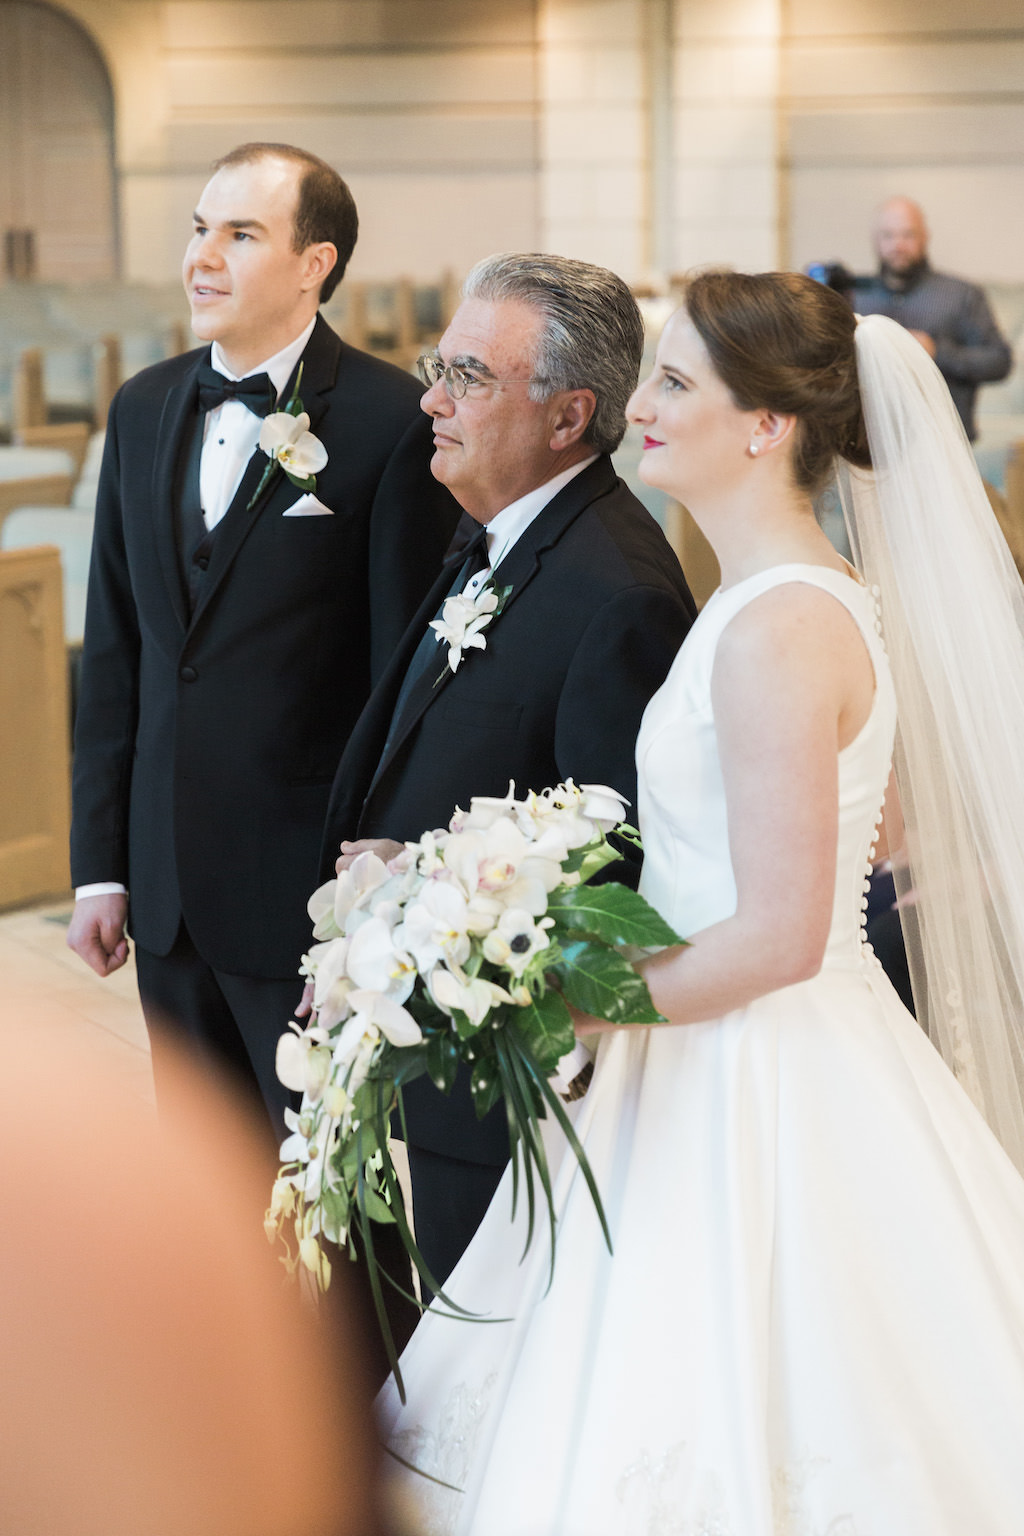 Bride and Father Church Wedding Ceremony Portrait, White Sleeveless Wedding Gown | White and Green Floral Bouquet | First Baptist Church of St. Petersburg